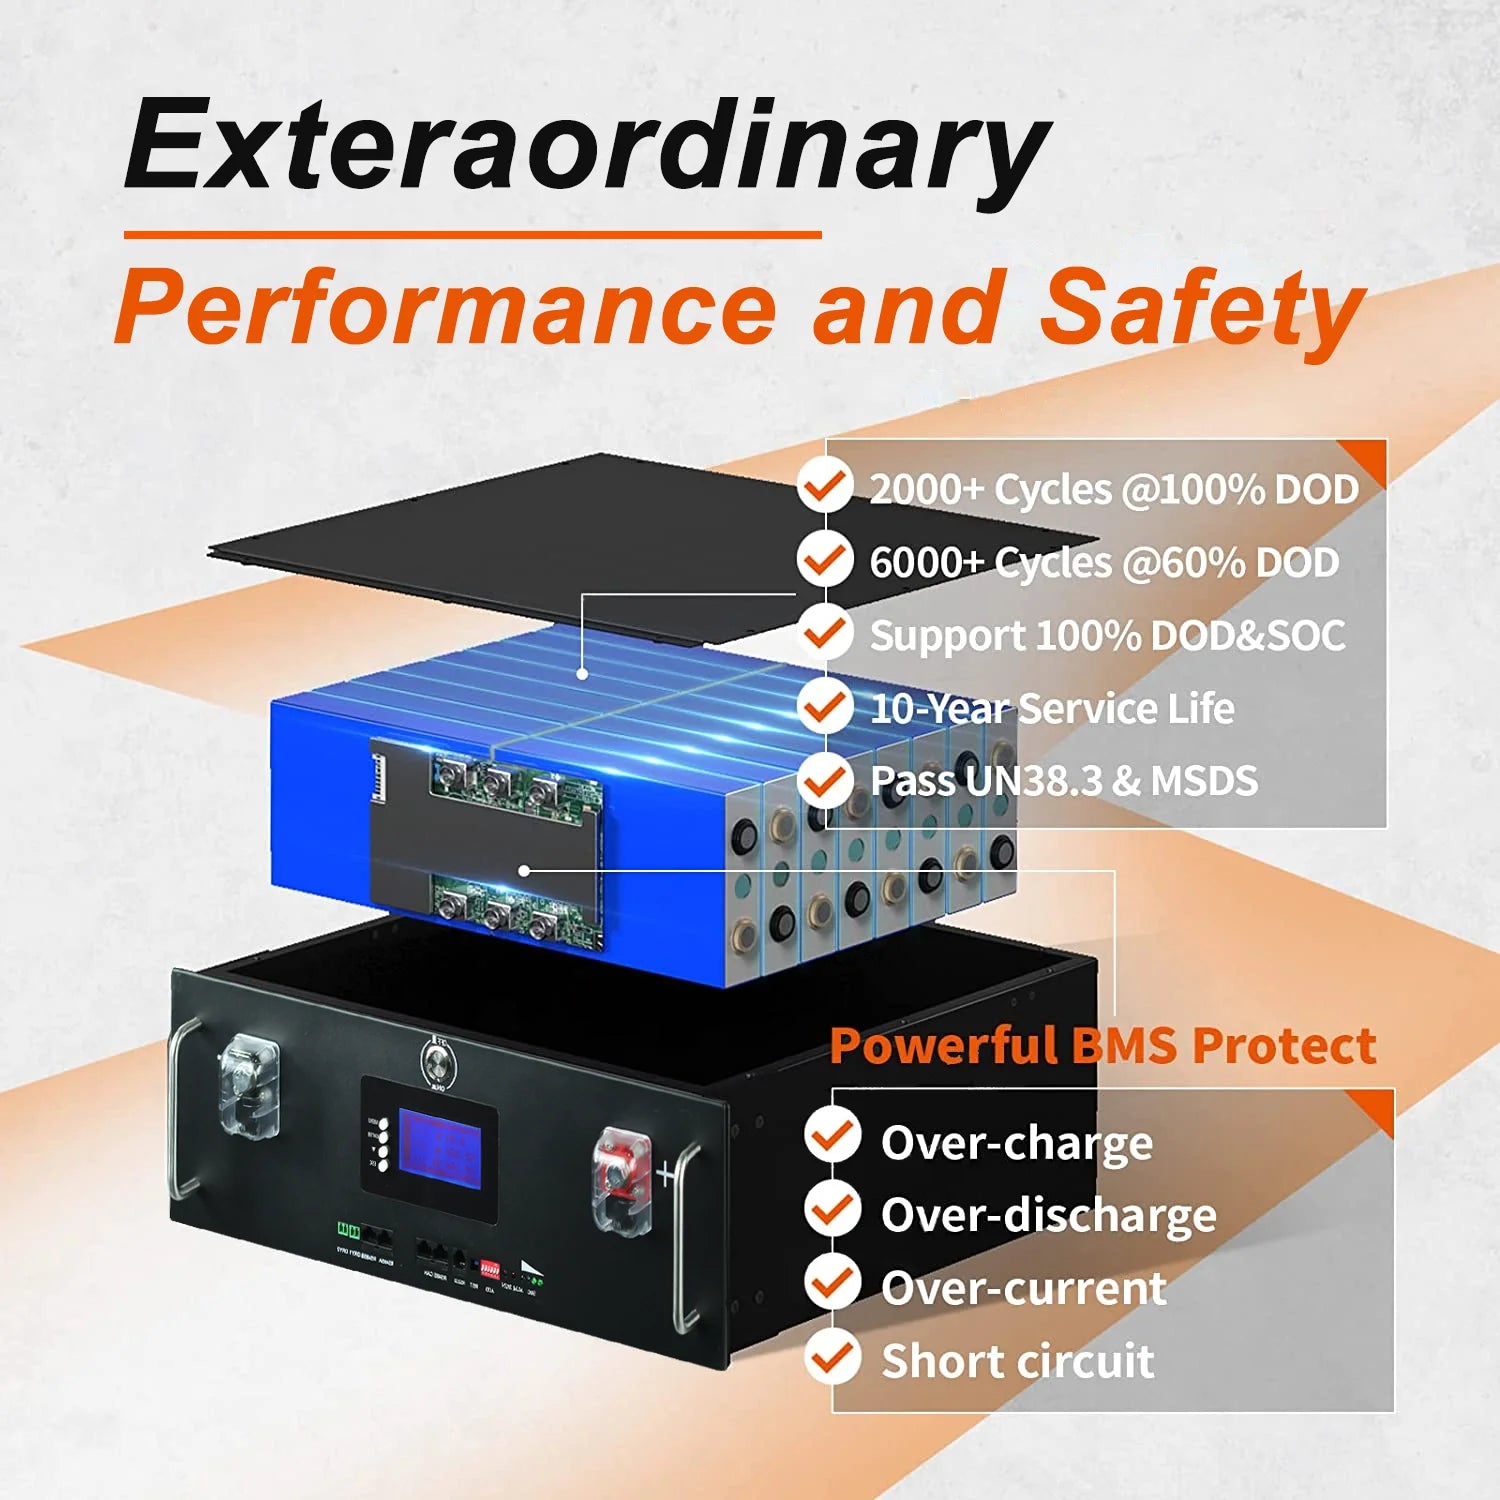 New 48V 100Ah LiFePo4 Battery, High-performance battery pack with advanced safety features for reliable power storage.